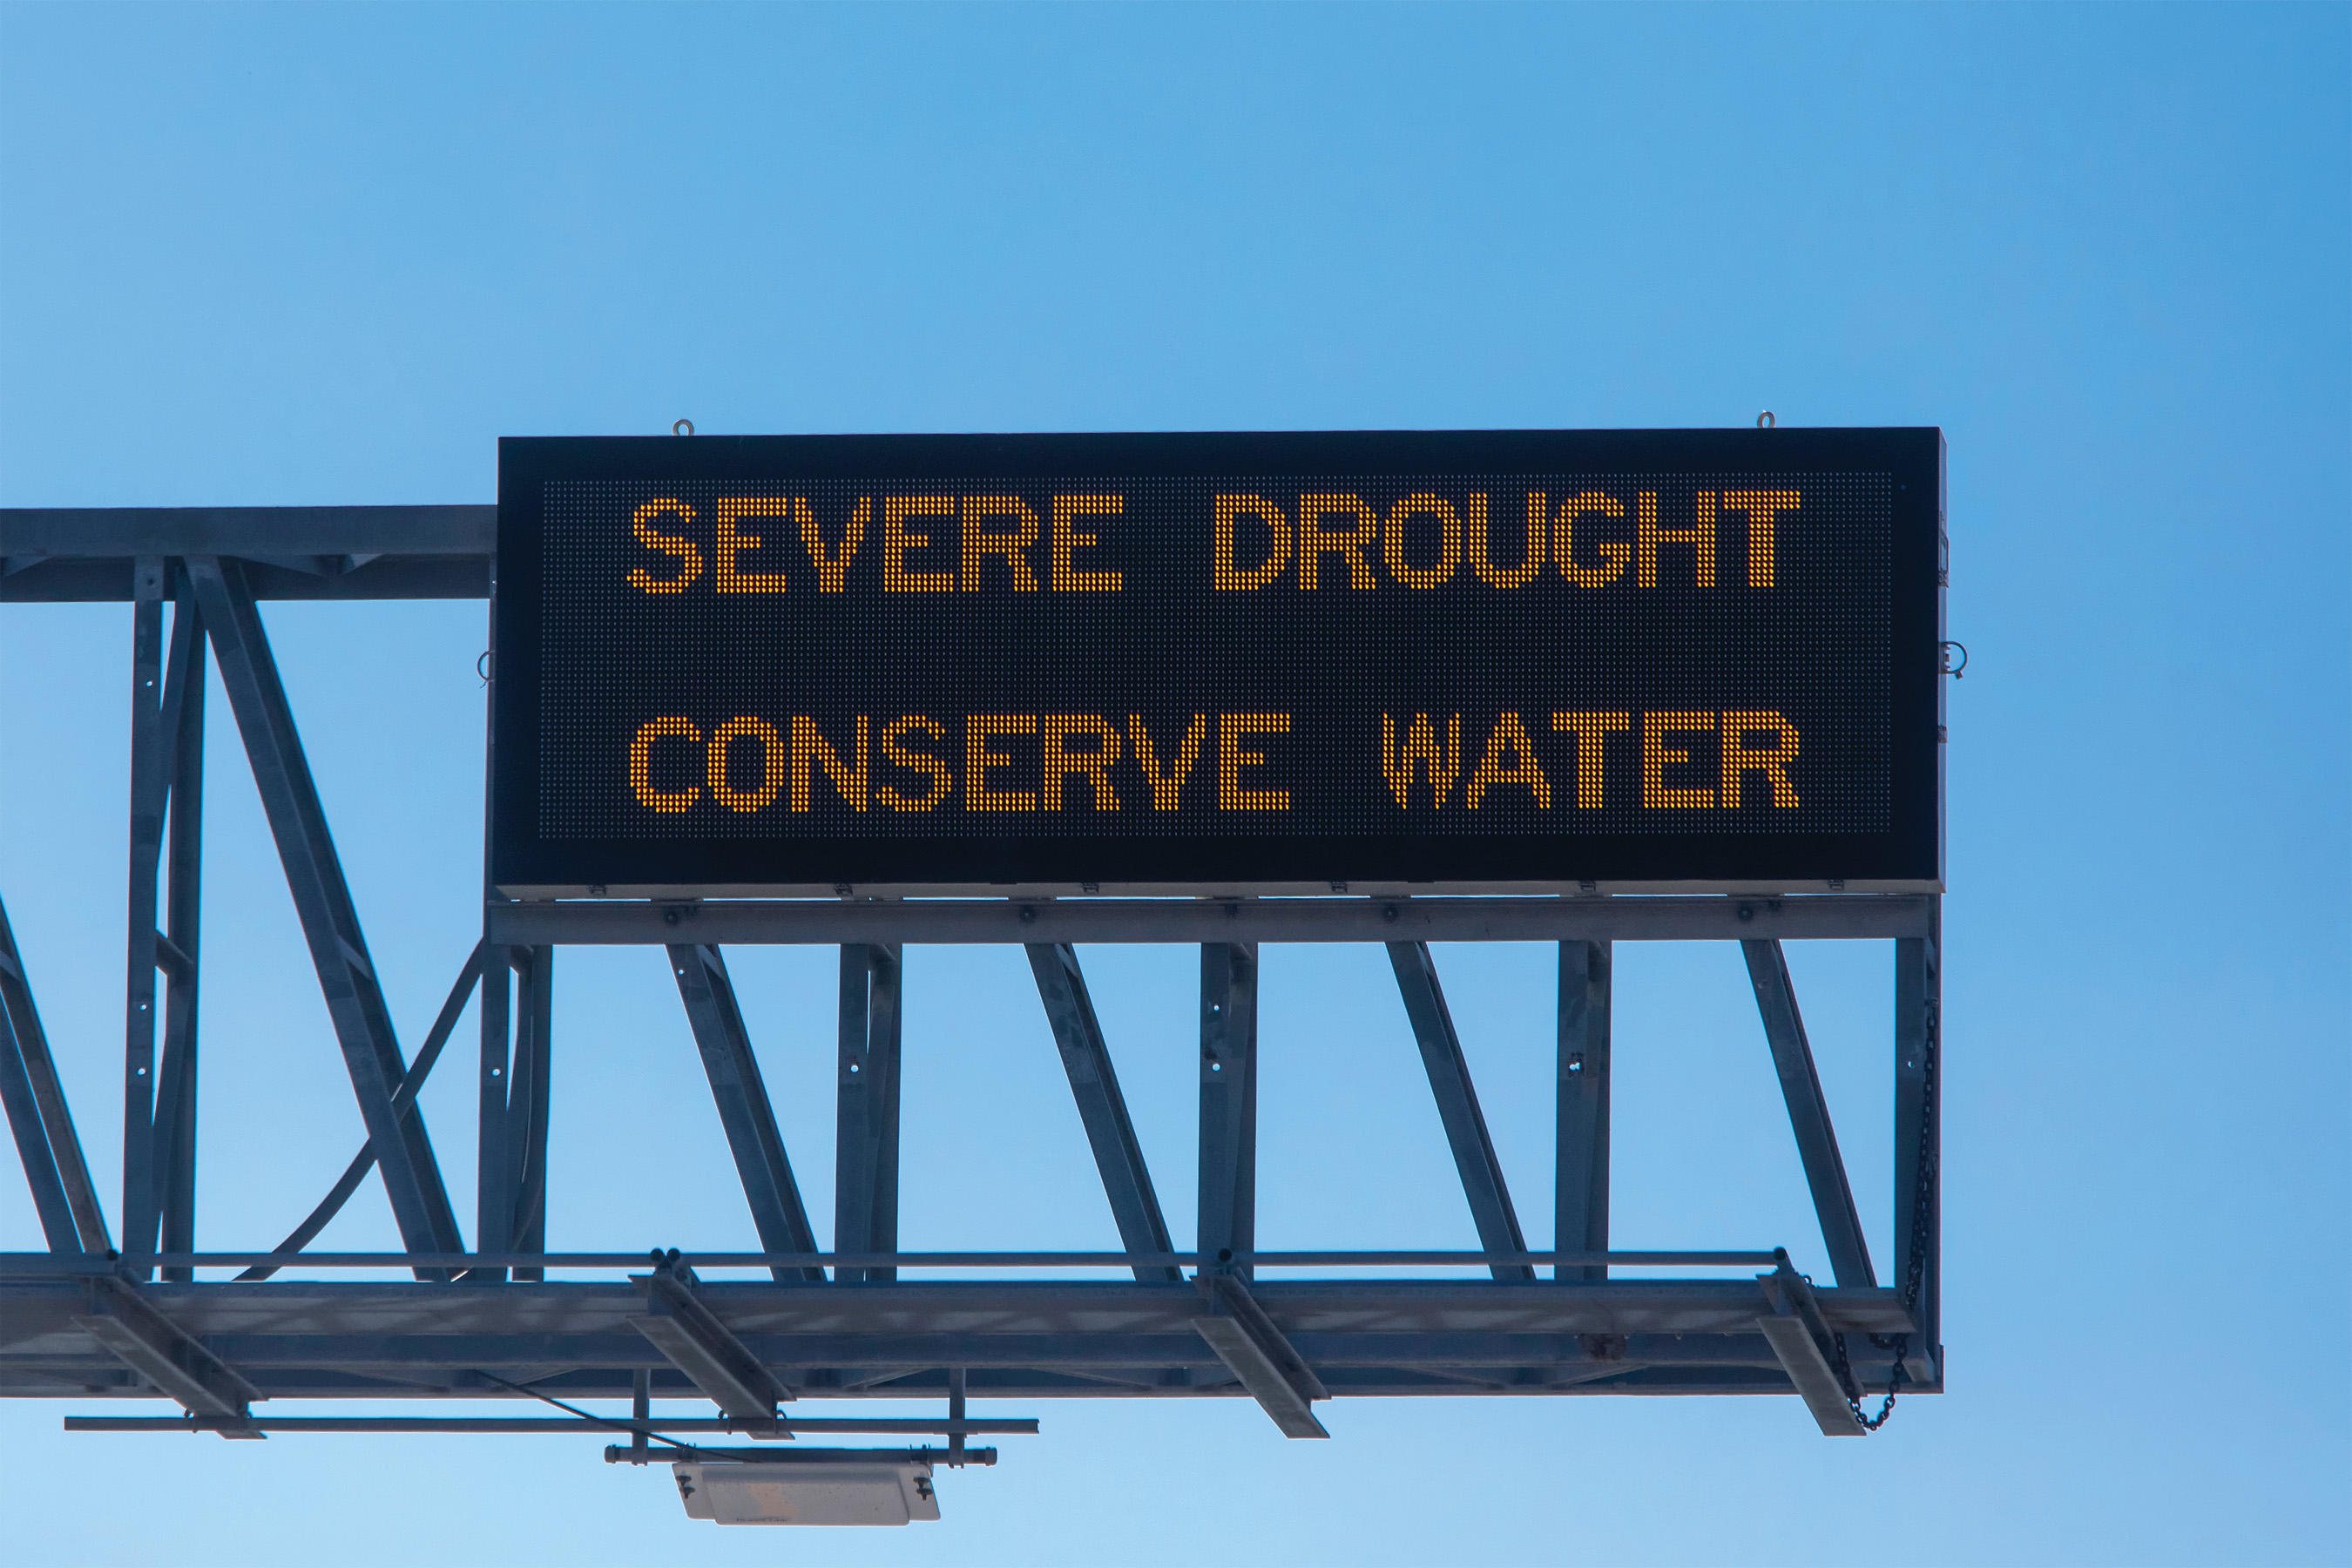 Severe Drought, Conserve Water sign